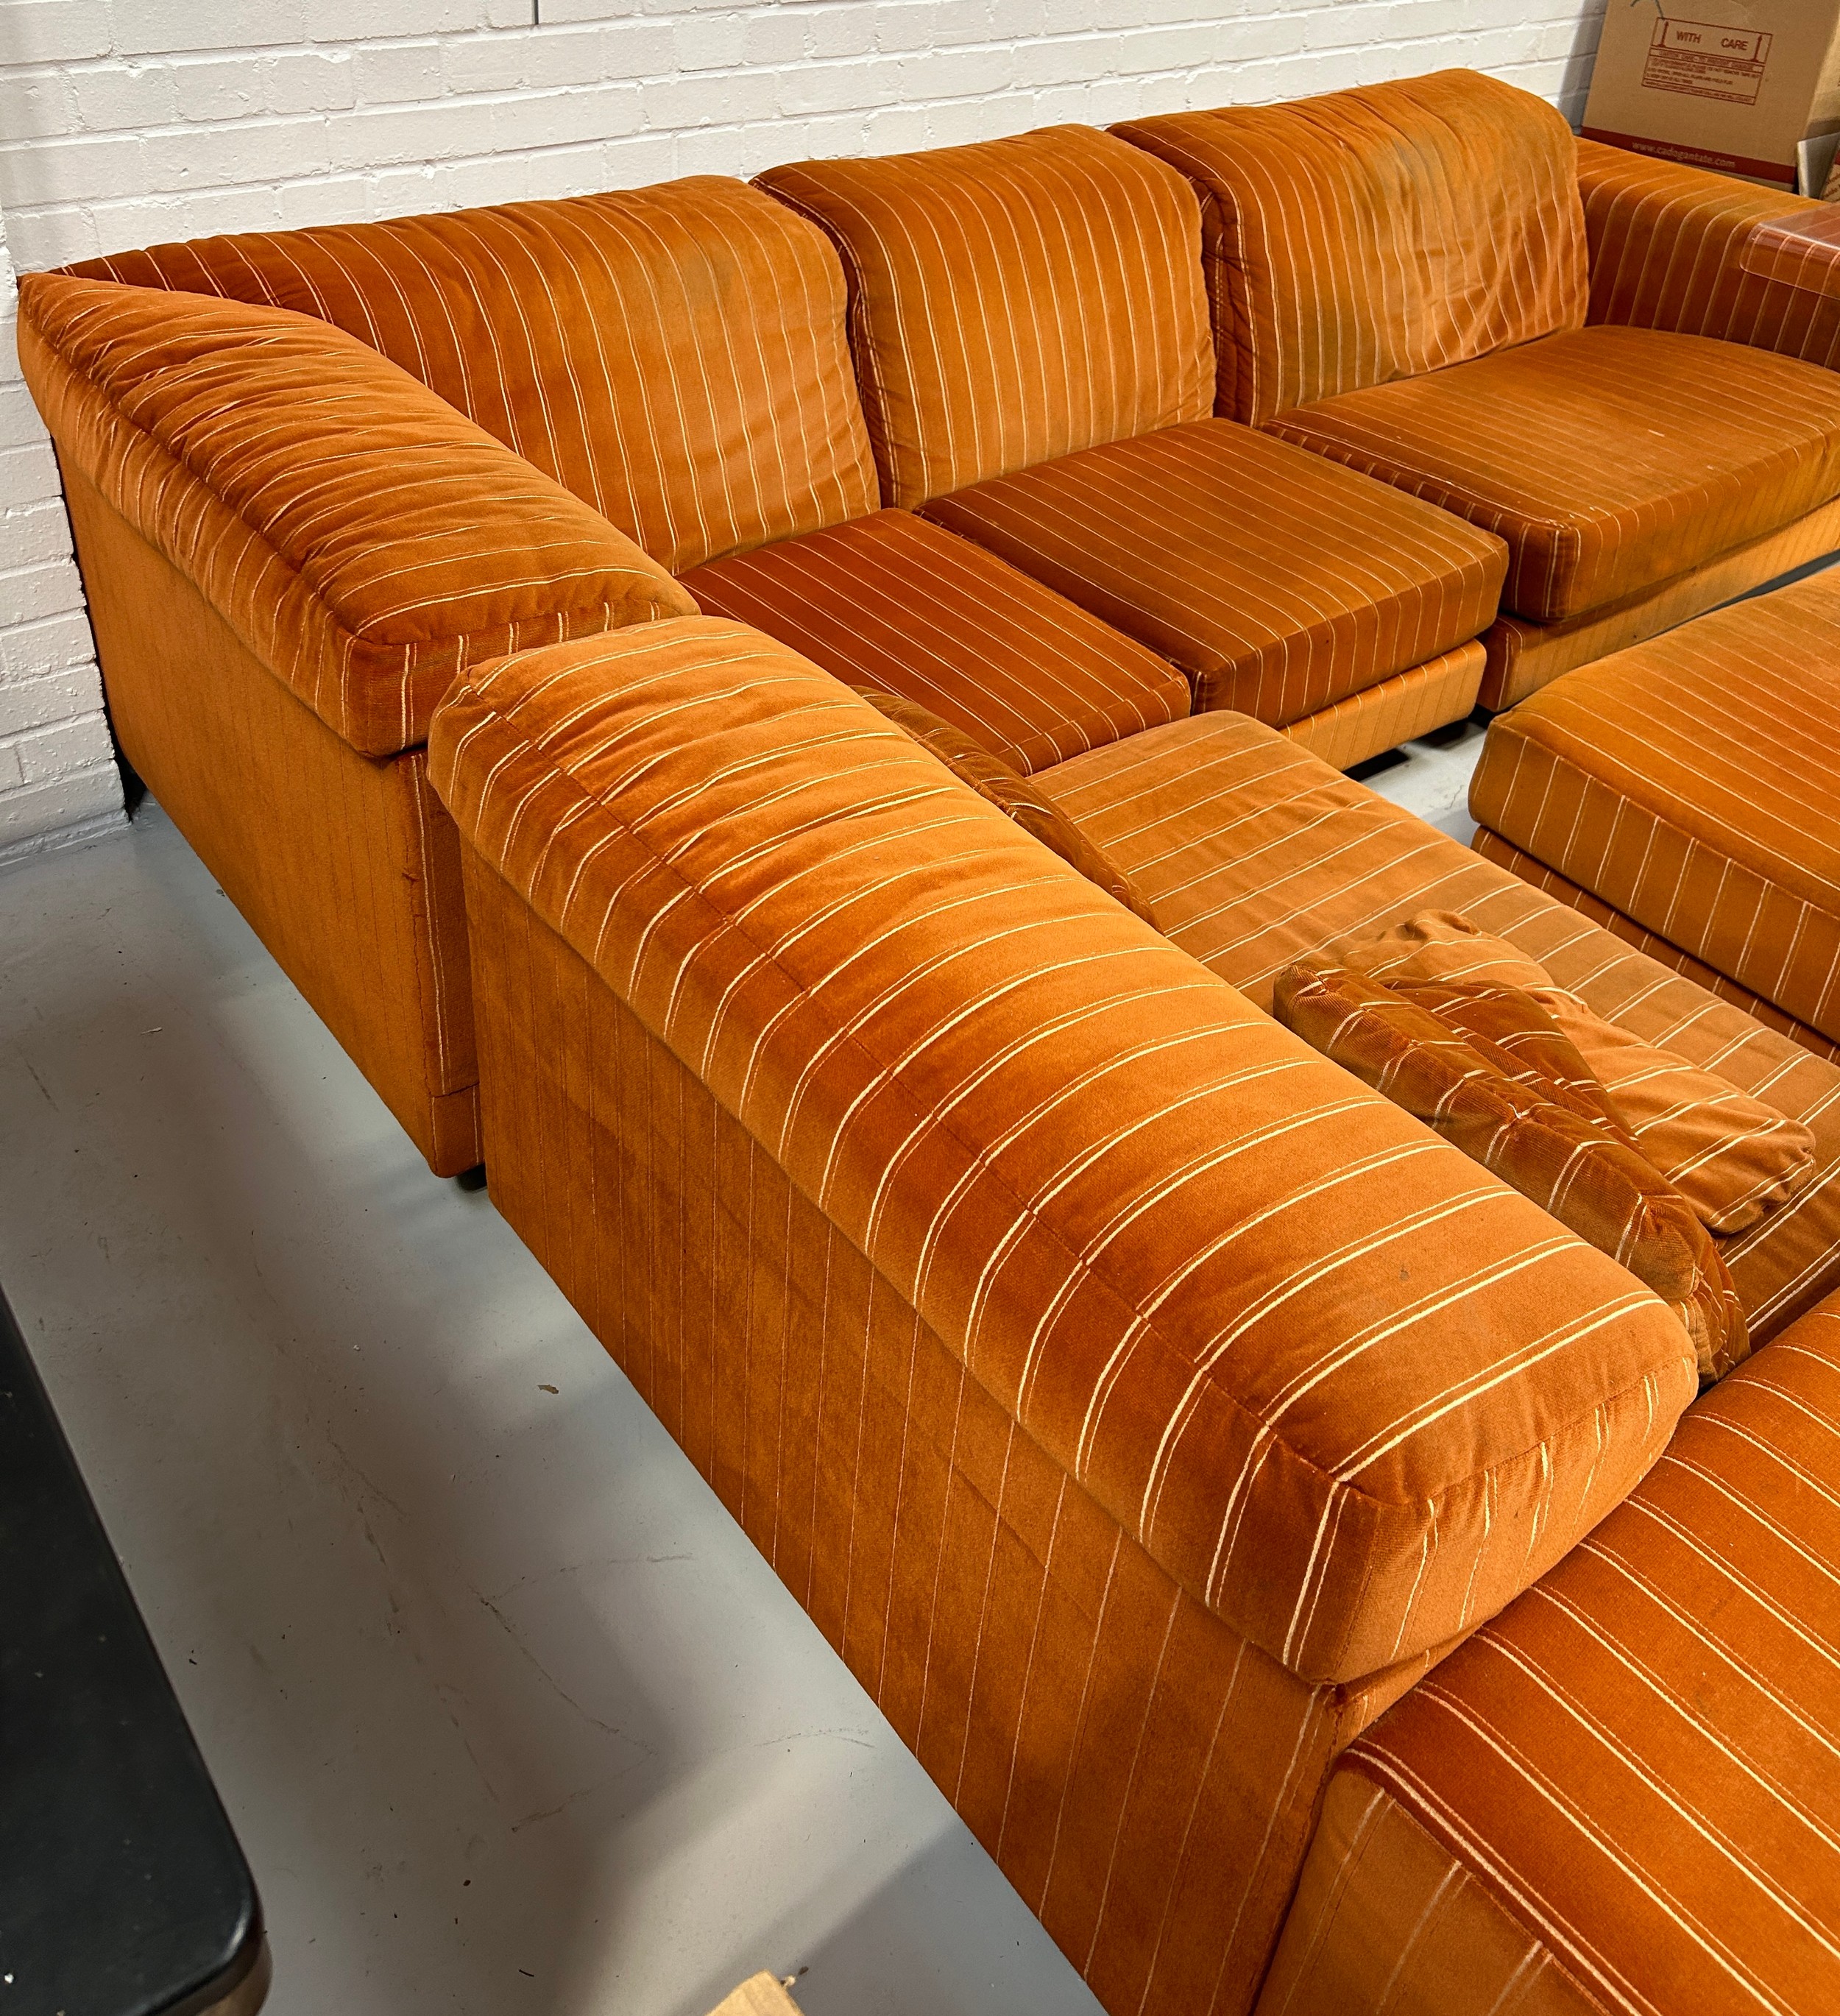 HOWARD KEITH: A LARGE SECTIONAL CORNER SOFA UPHOLSTERED IN STRIPED BURNT ORANGE FABRIC, 300cm x - Image 2 of 5